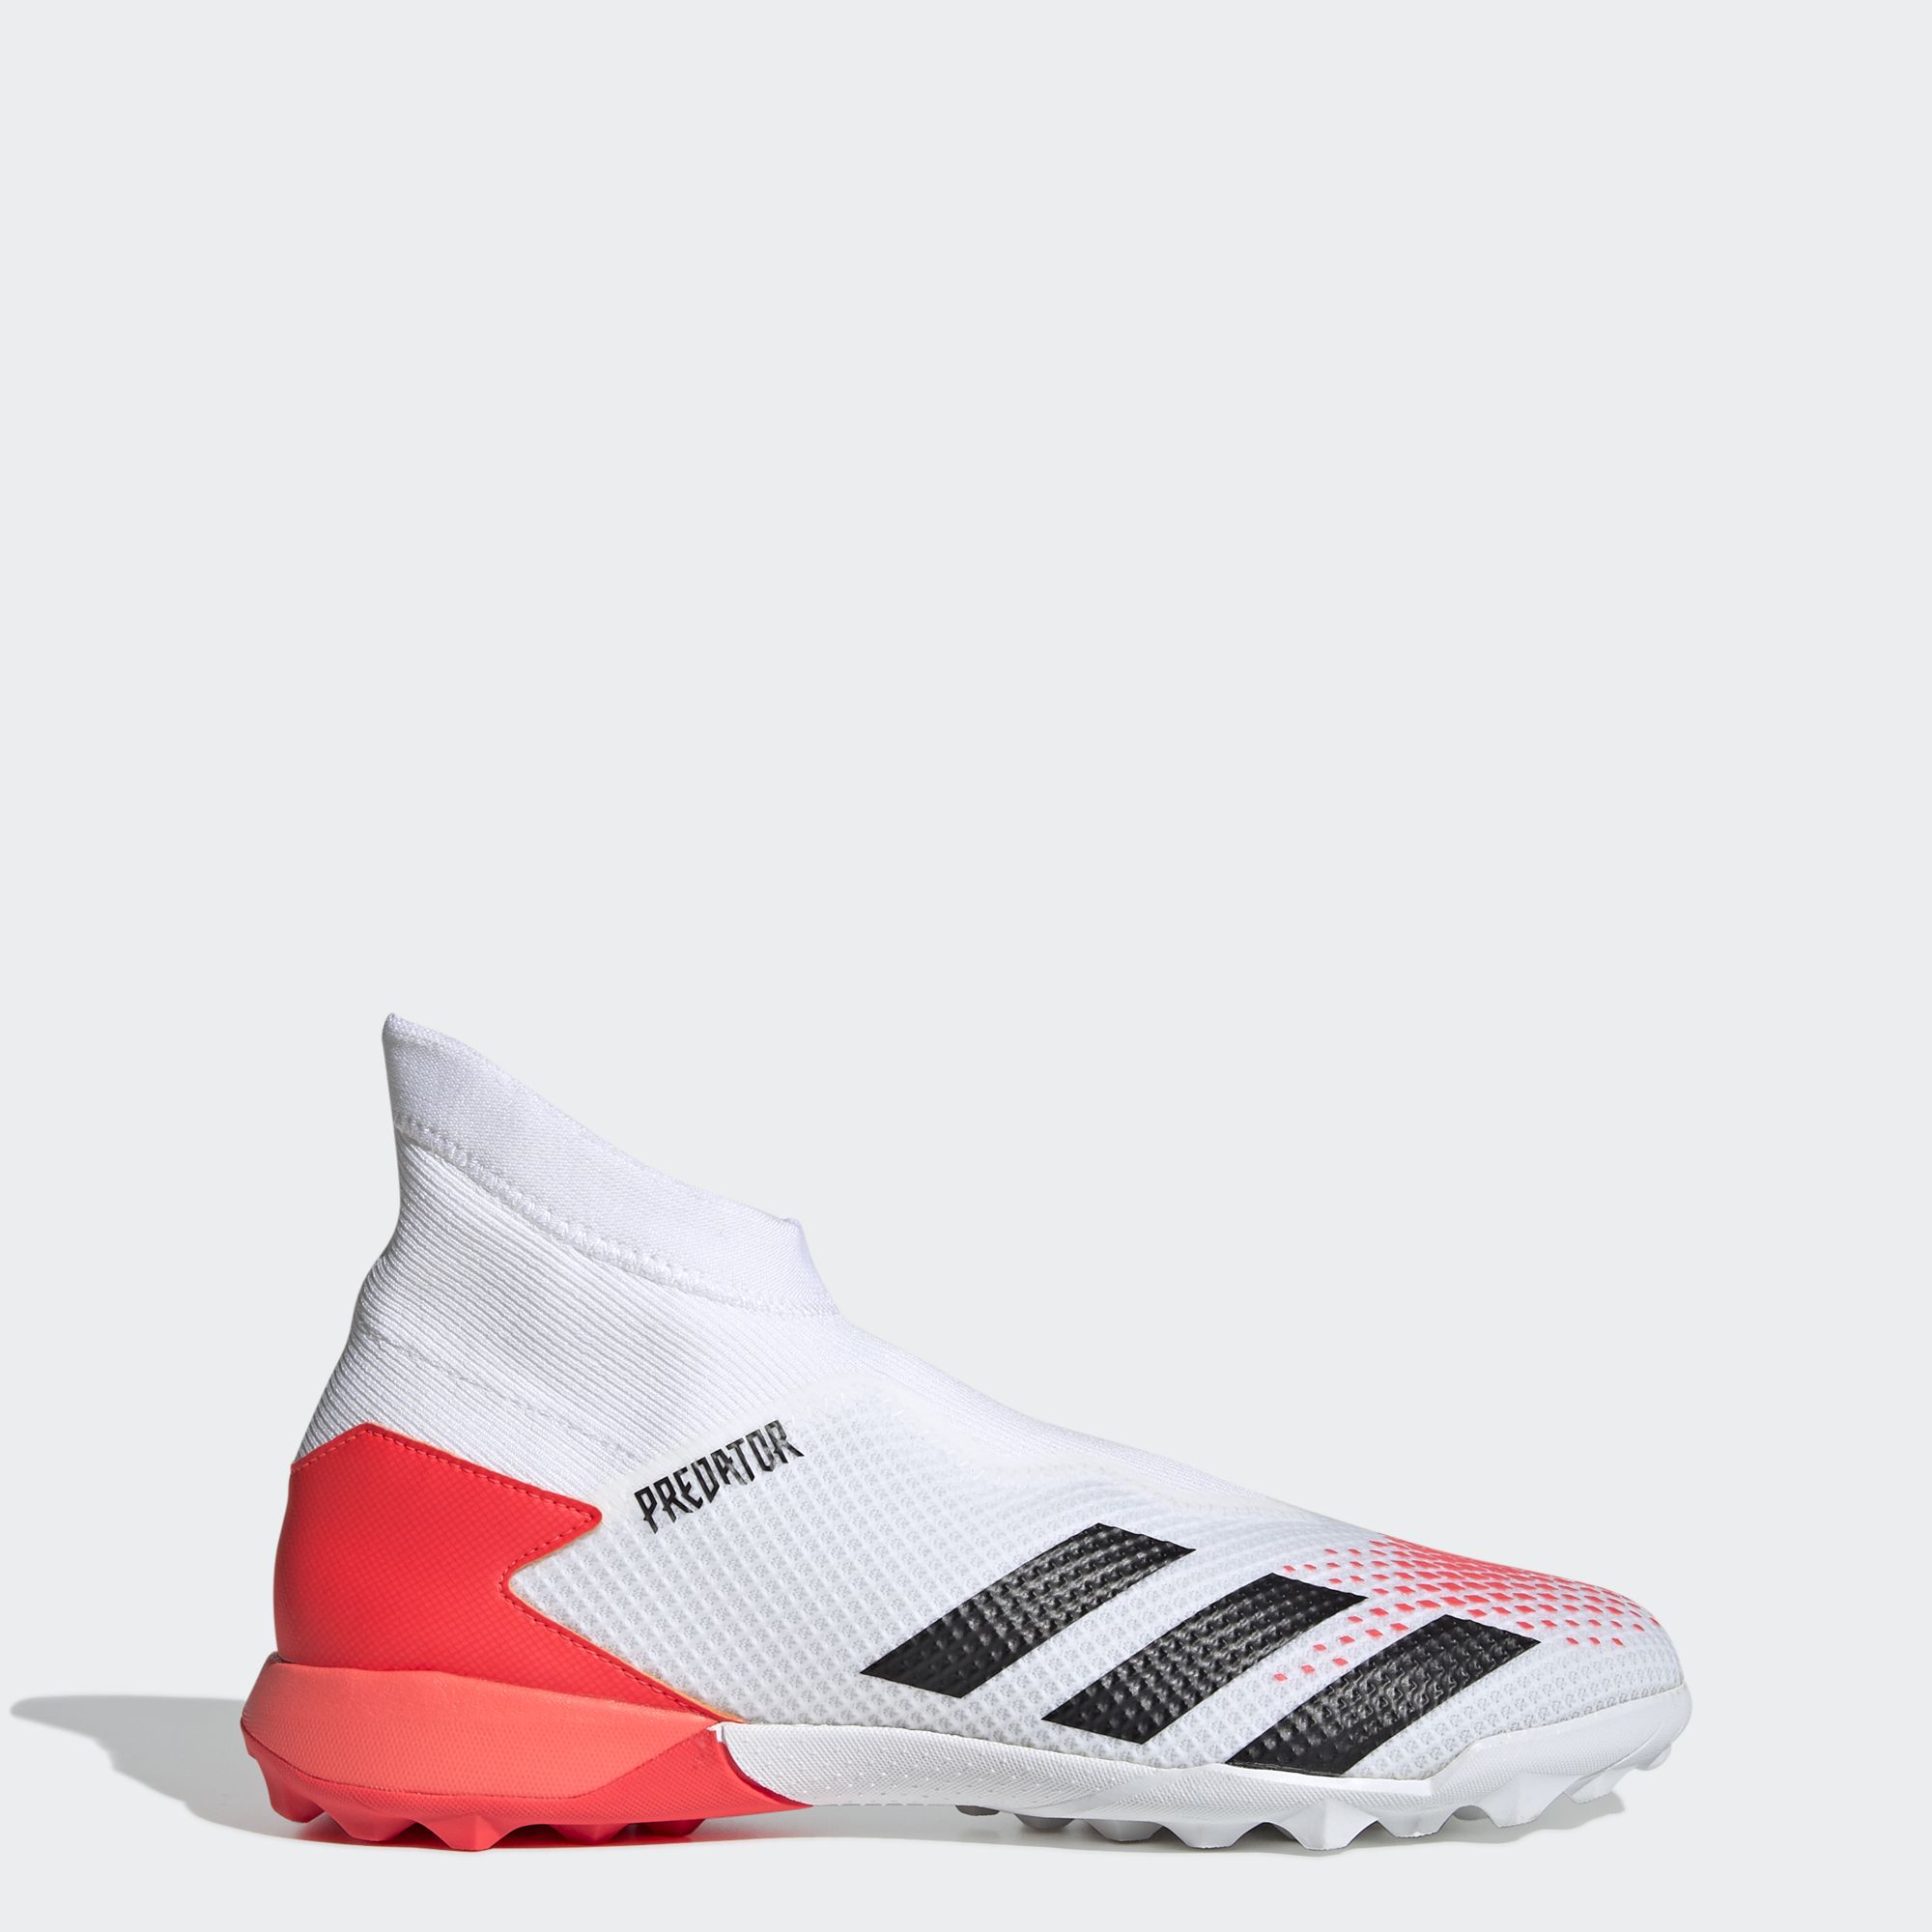 adidas football shoes under 3